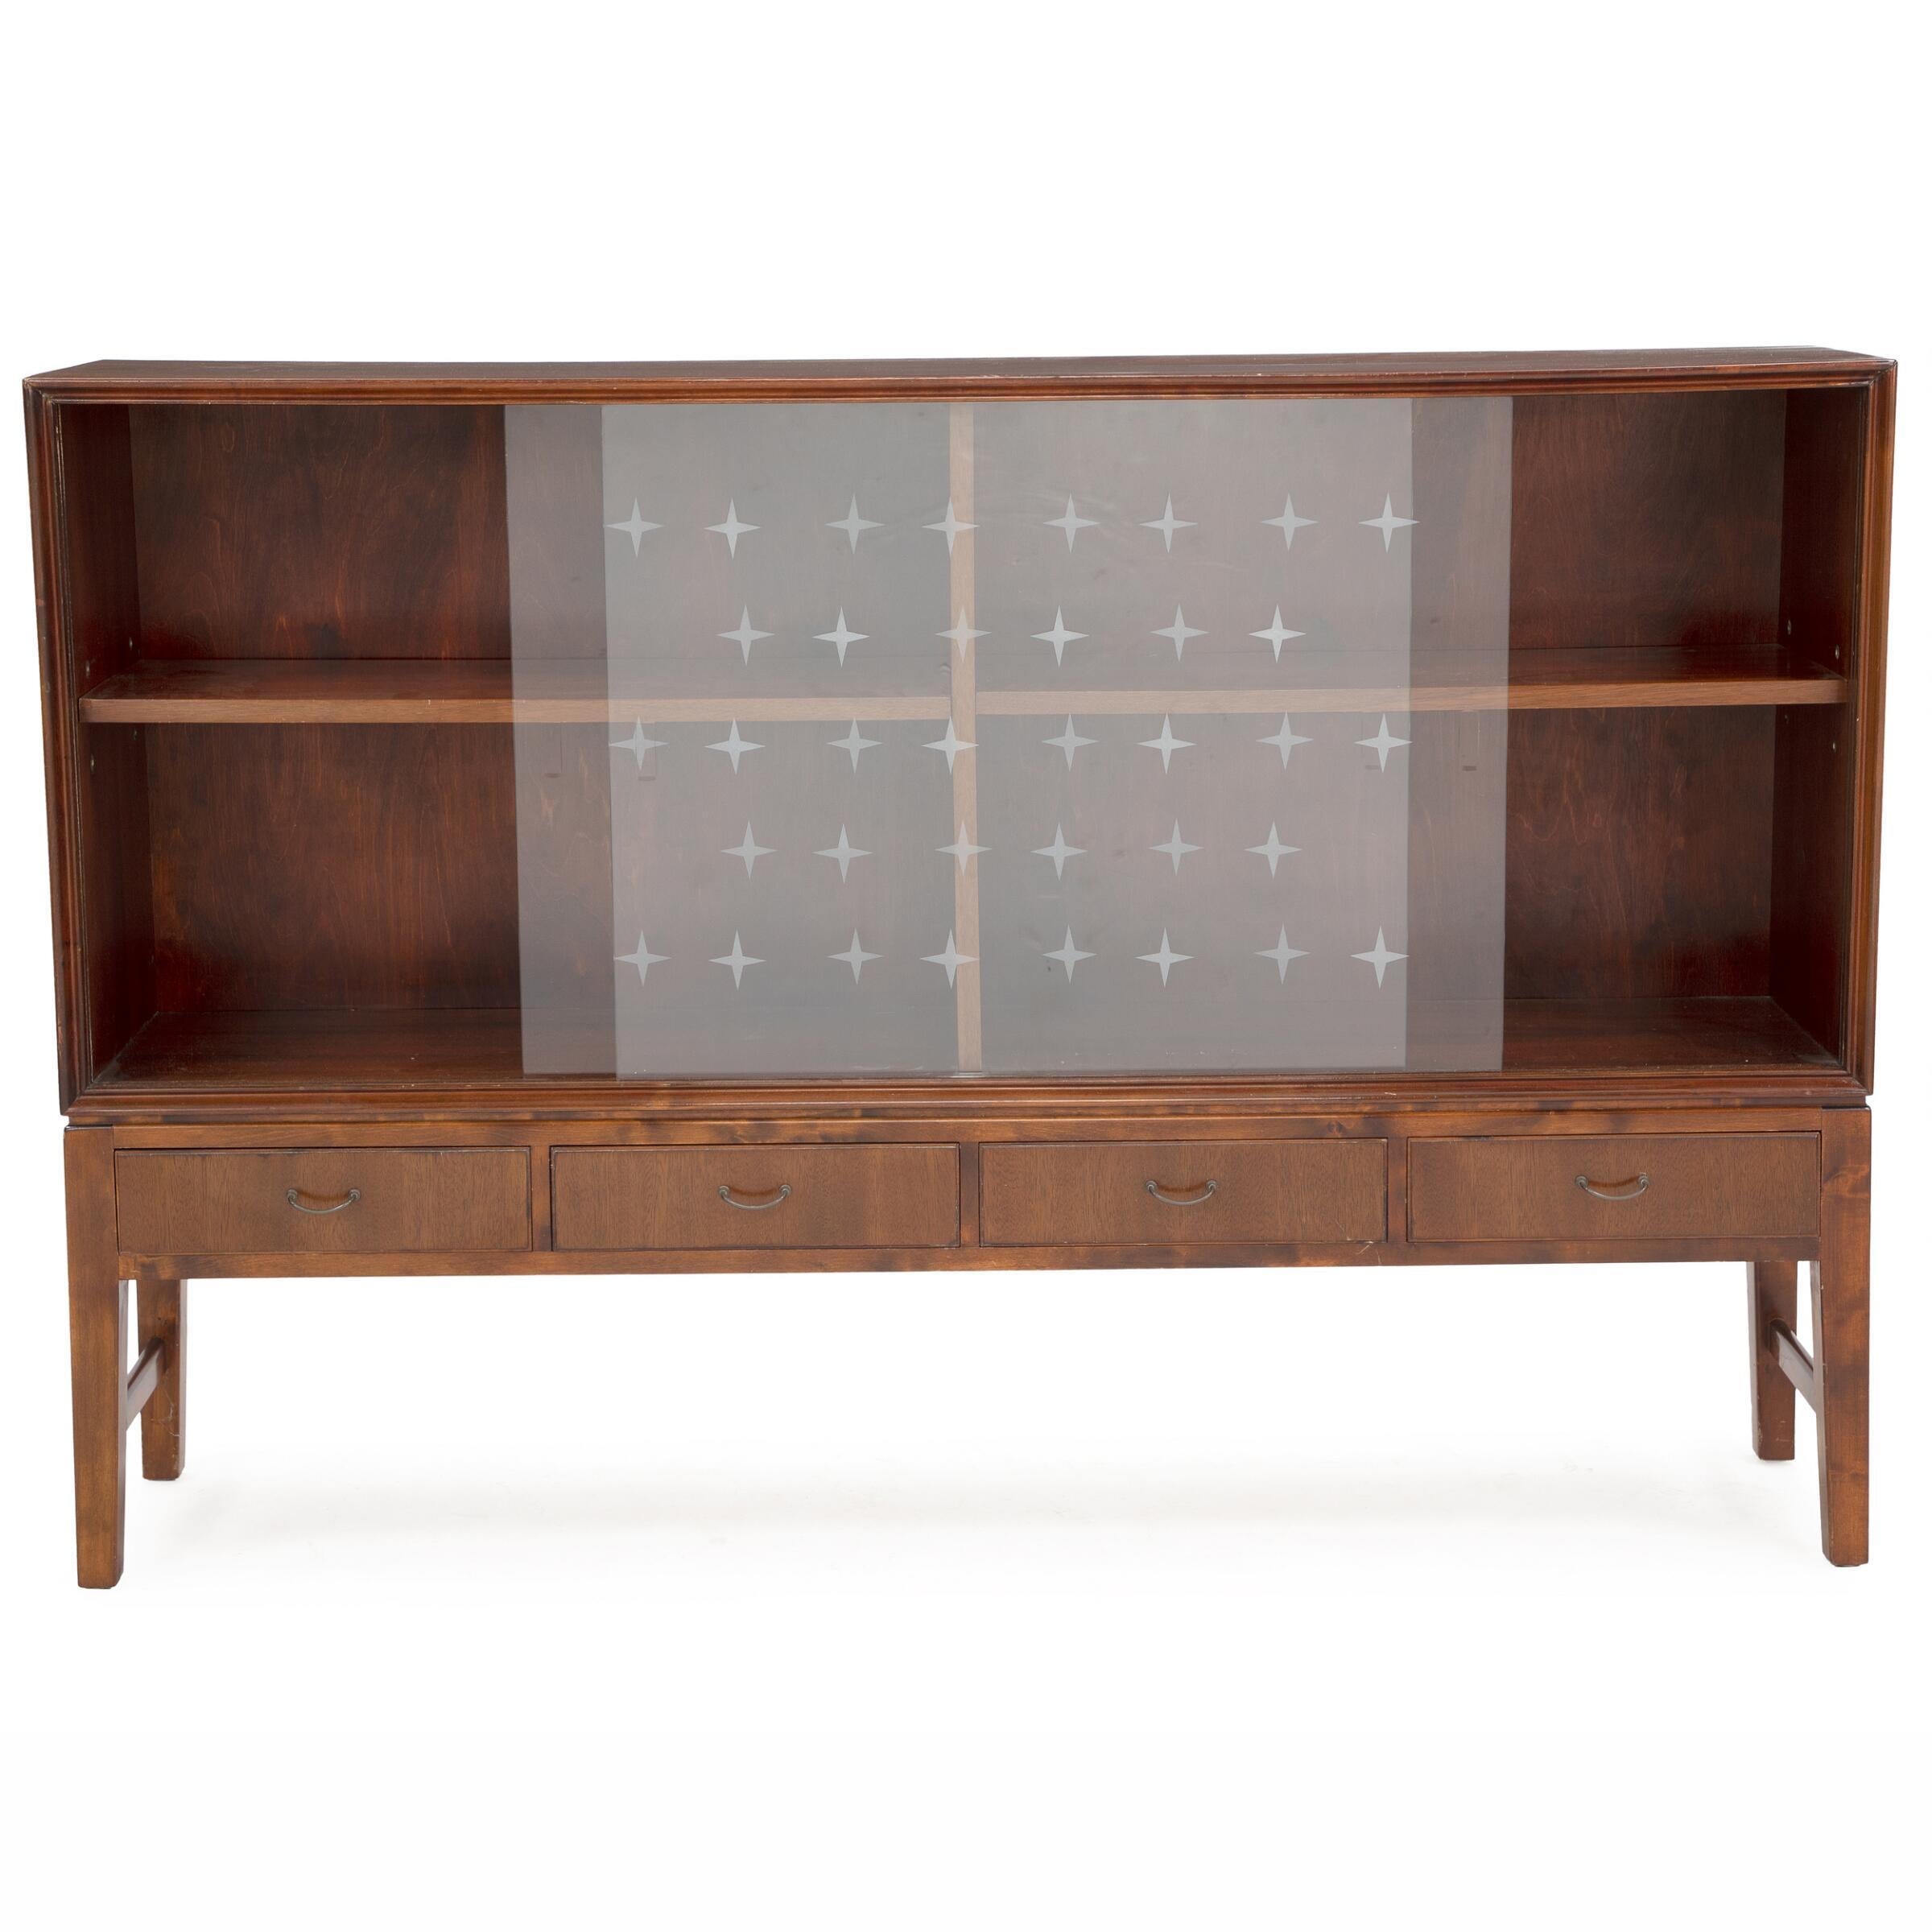 Danish Modern Showcase cabinet with sliding glass doors etched with star design, two shelves in mahogany. From retailer Holger Christensen, Copenhagen, in 1950's.